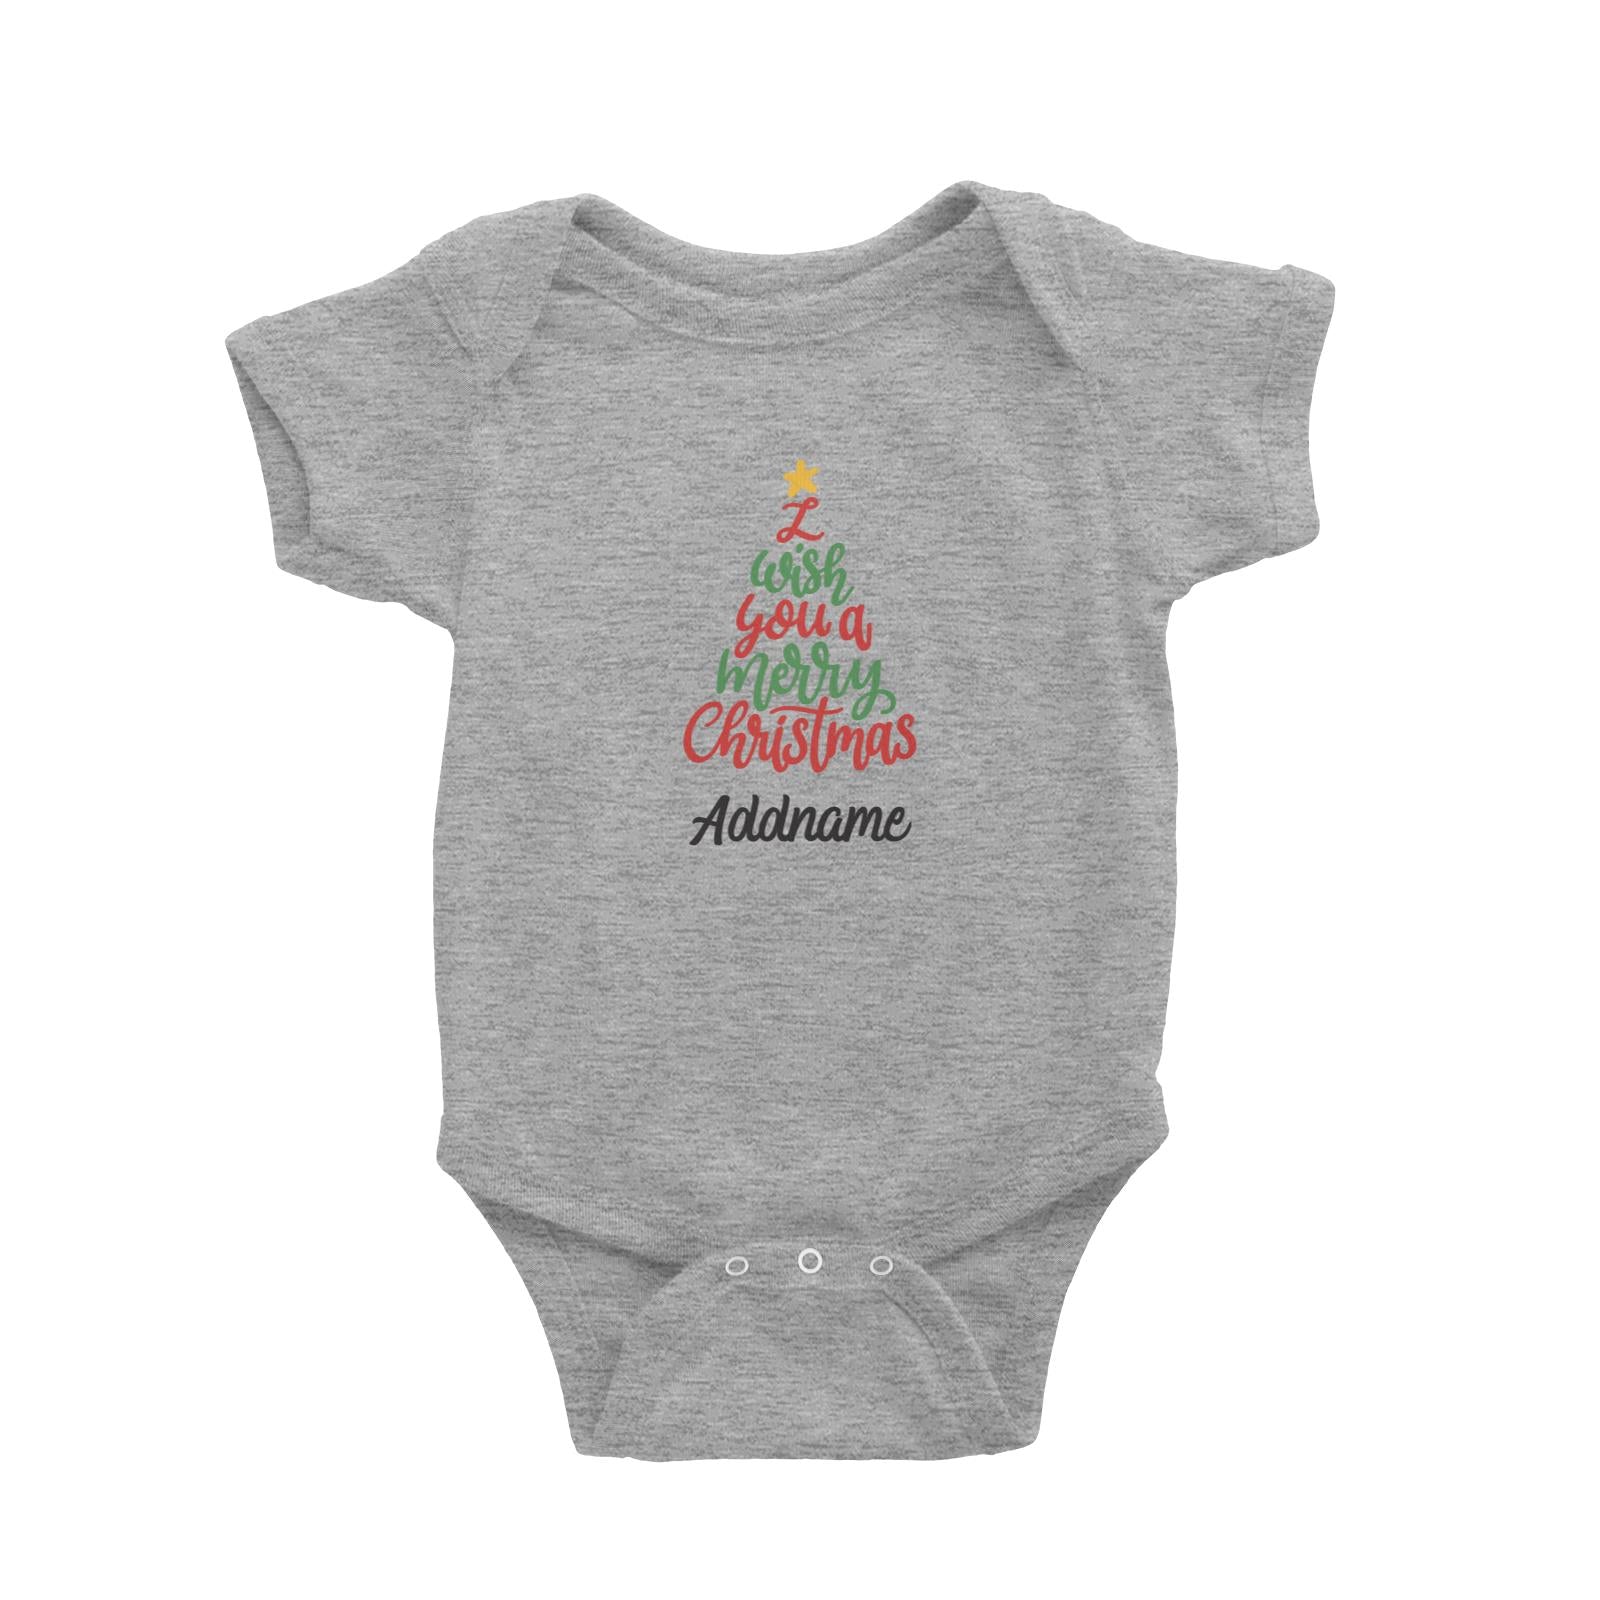 Christmas Series I Wish You A Merry Christmas Tree Baby Romper